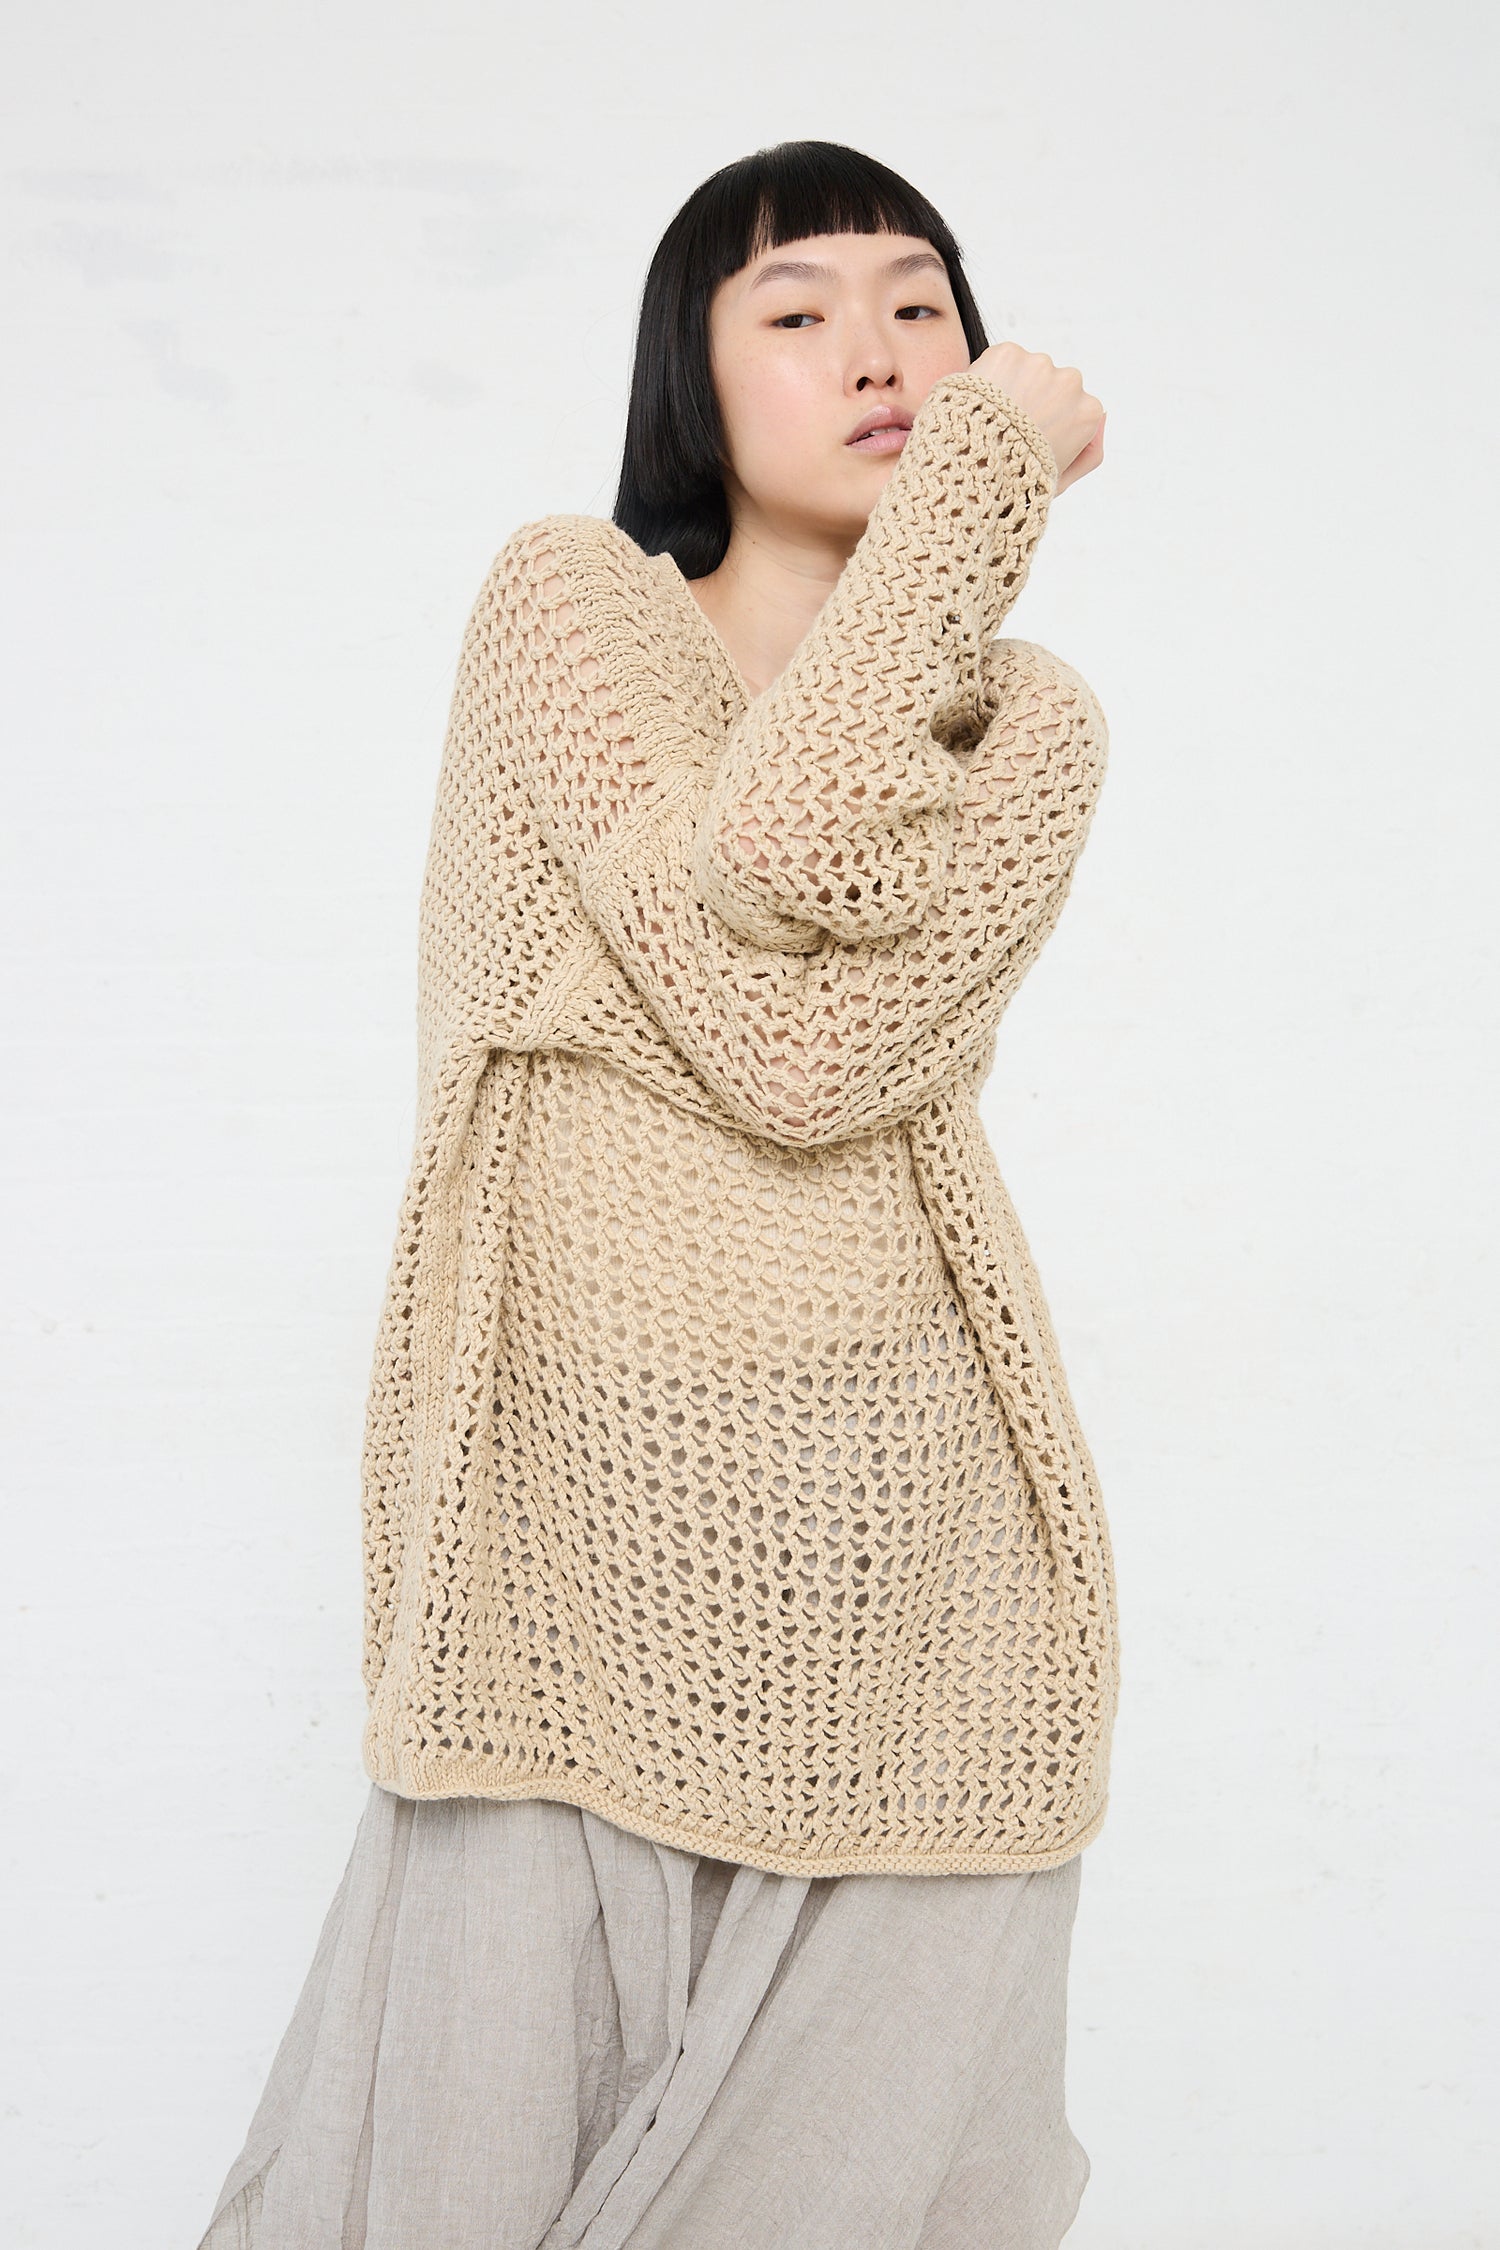 Woman in a Lauren Manoogian Big Net Pullover in Jute posing with one hand near her face.